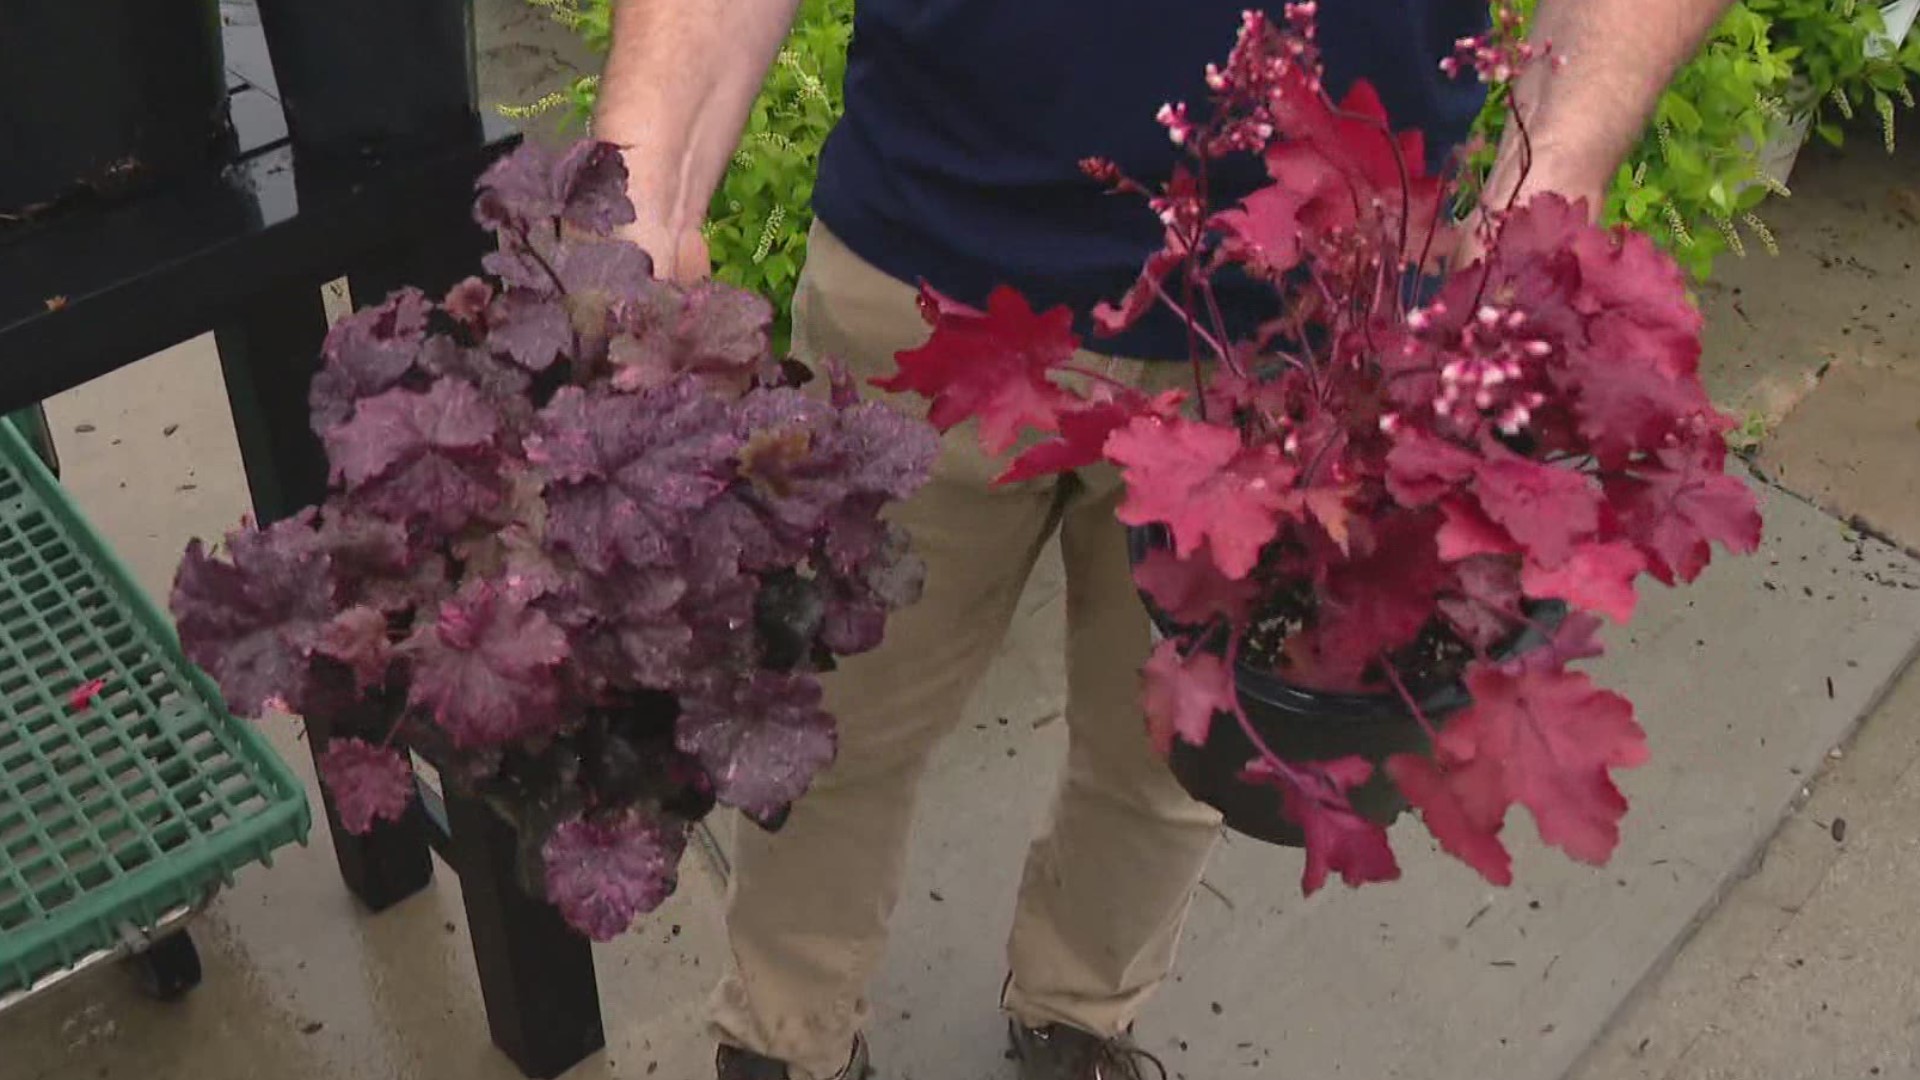 If you're looking to add some shrubs to your landscape but aren't sure what to buy, Pat provides the answers.